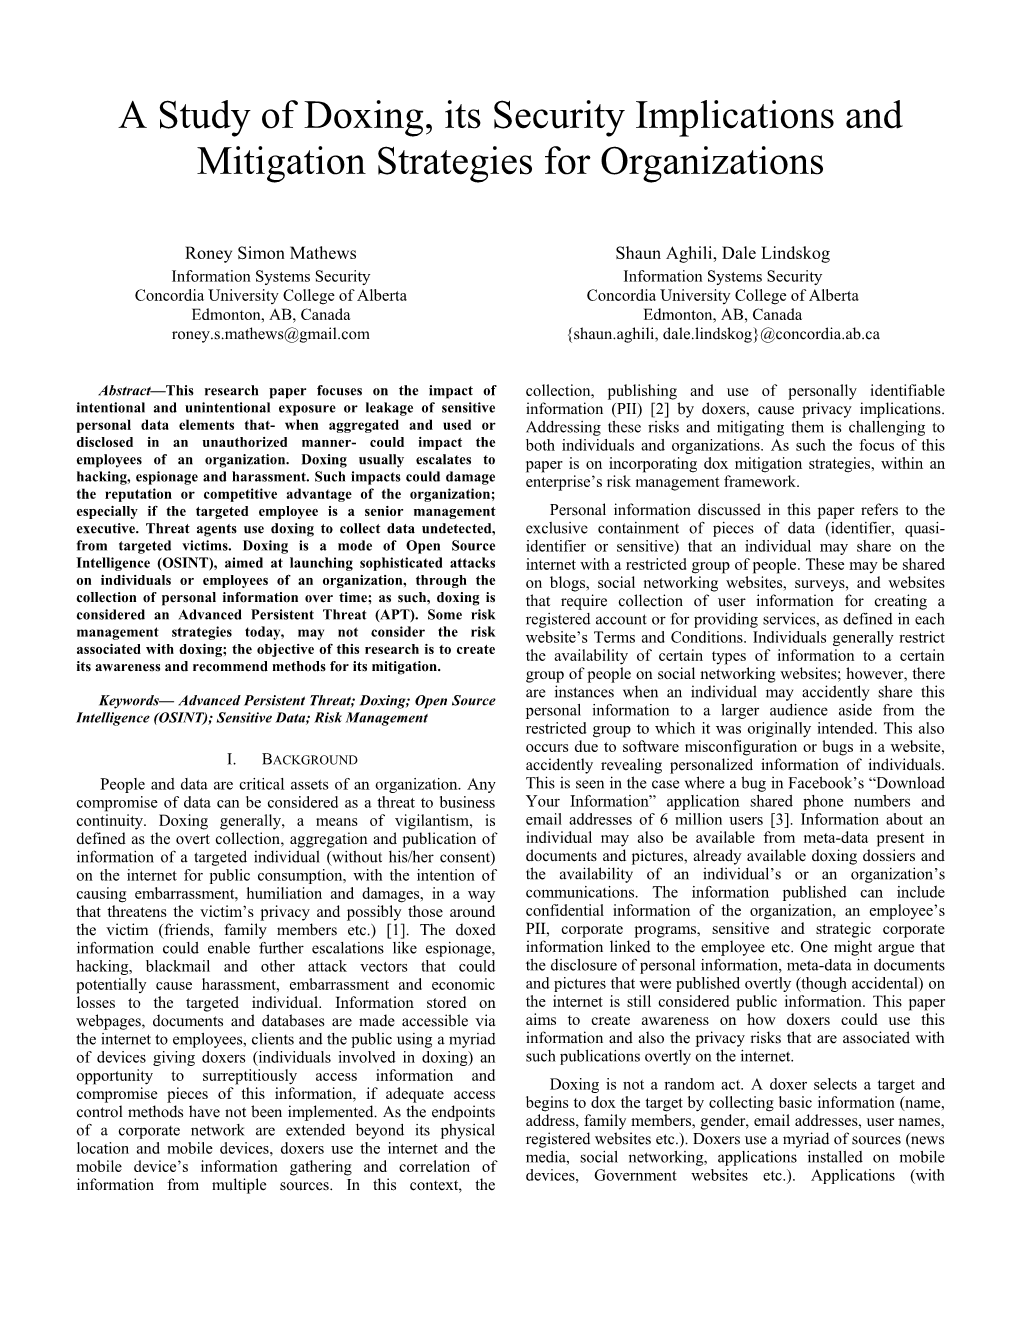 A Study of Doxing, Its Security Implications and Mitigation Strategies for Organizations